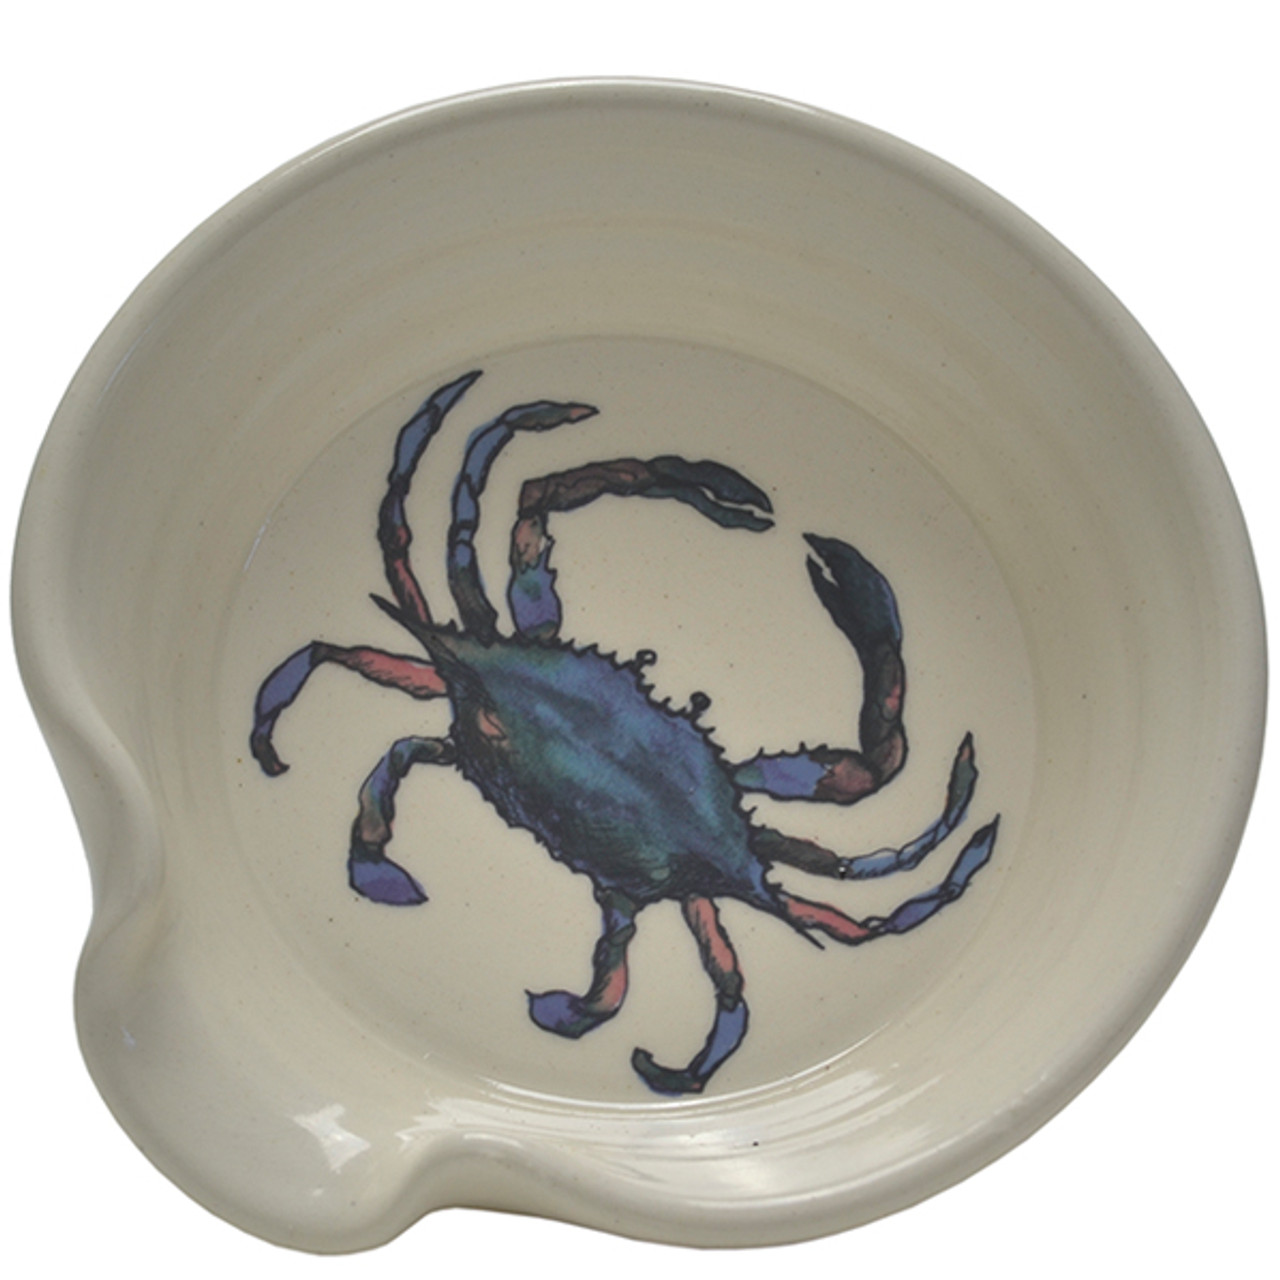 Spoon Rest - Crab - Great Bay Pottery